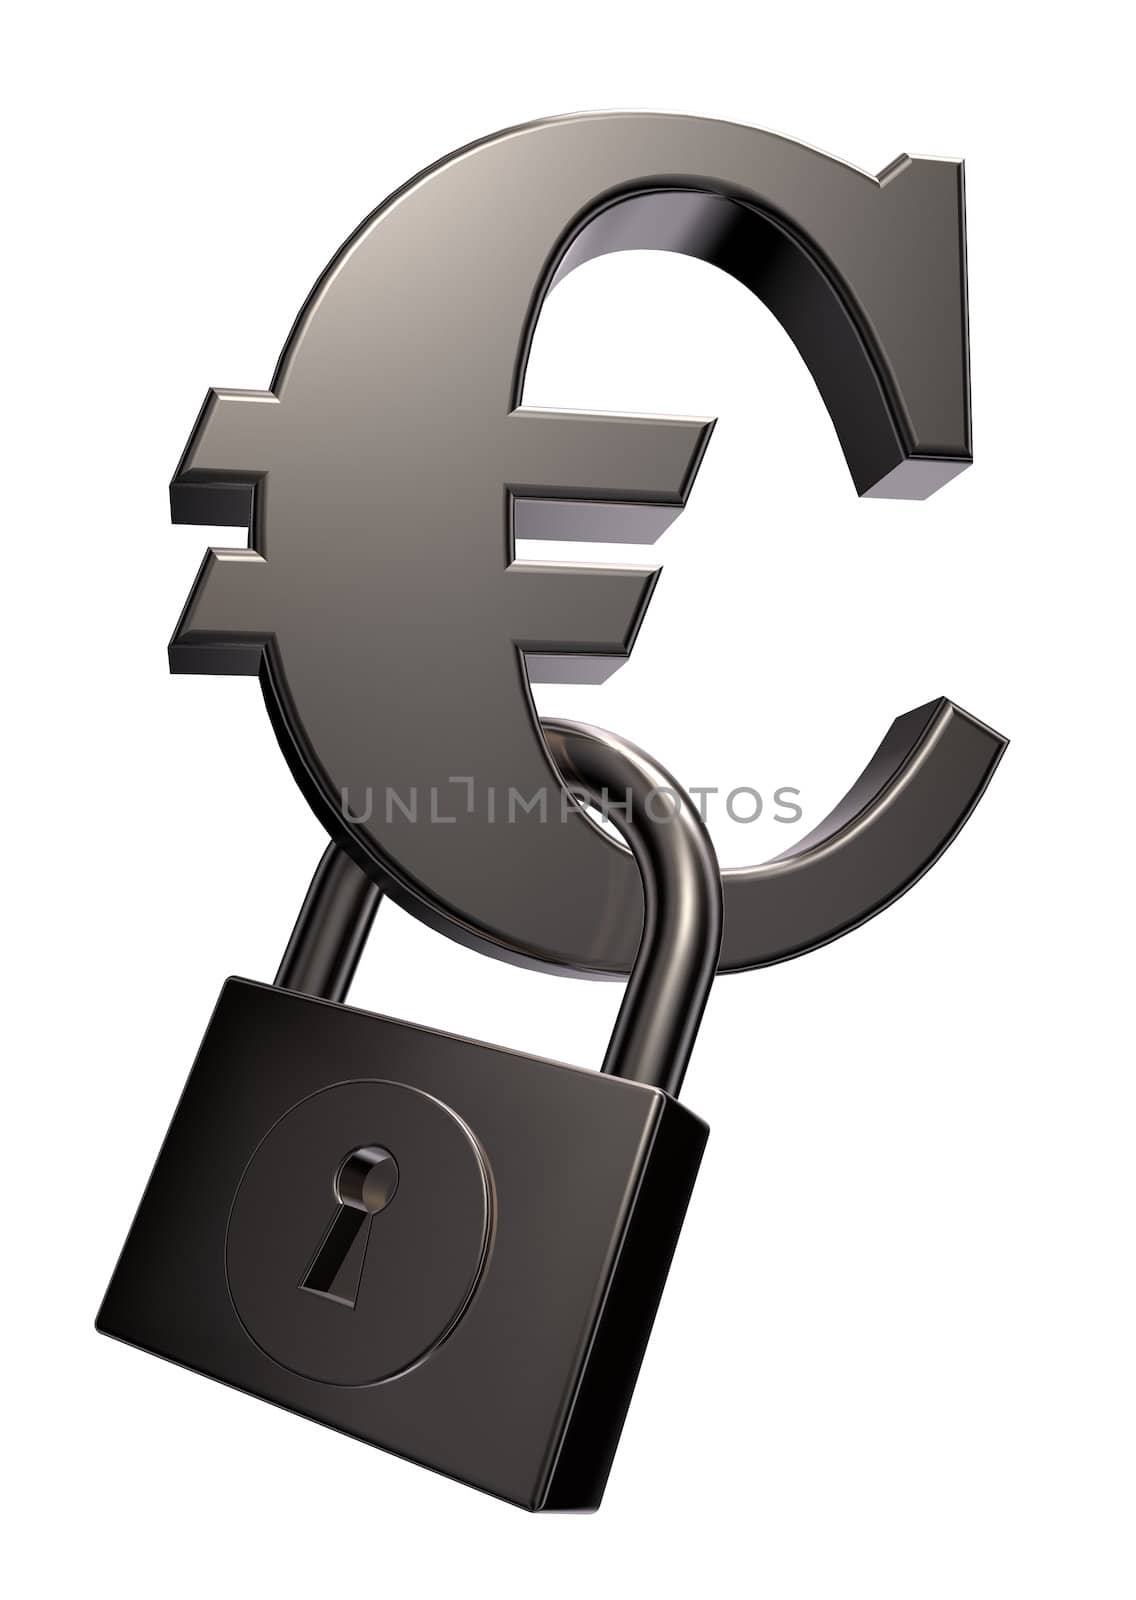 euro symbol and padlock by drizzd